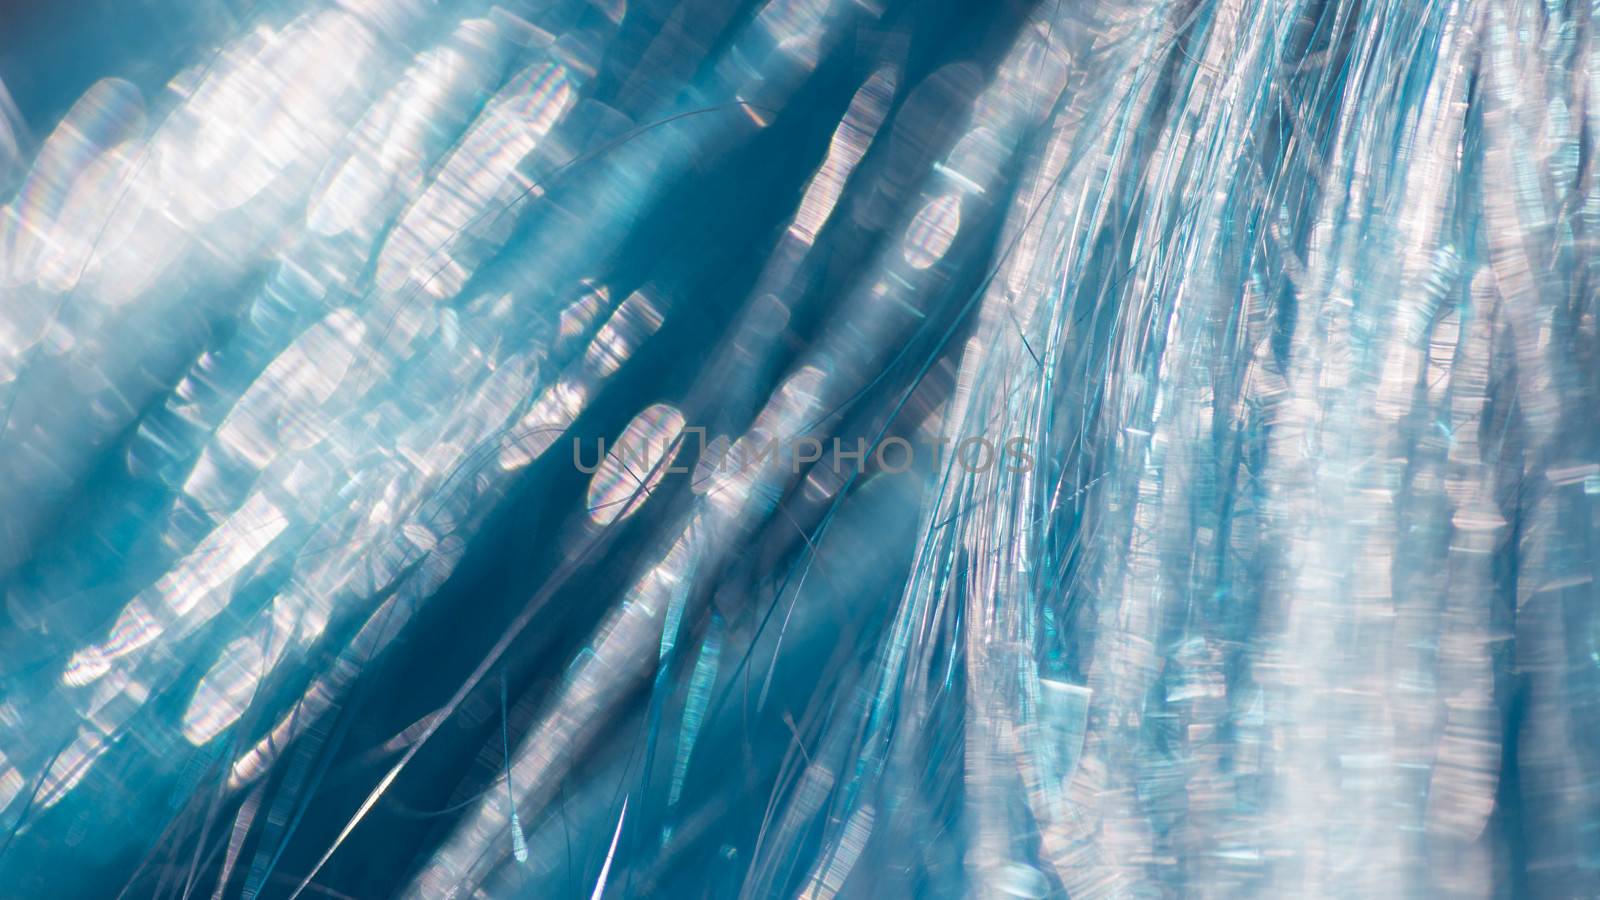 Abstract background of blue hairs by tadeush89